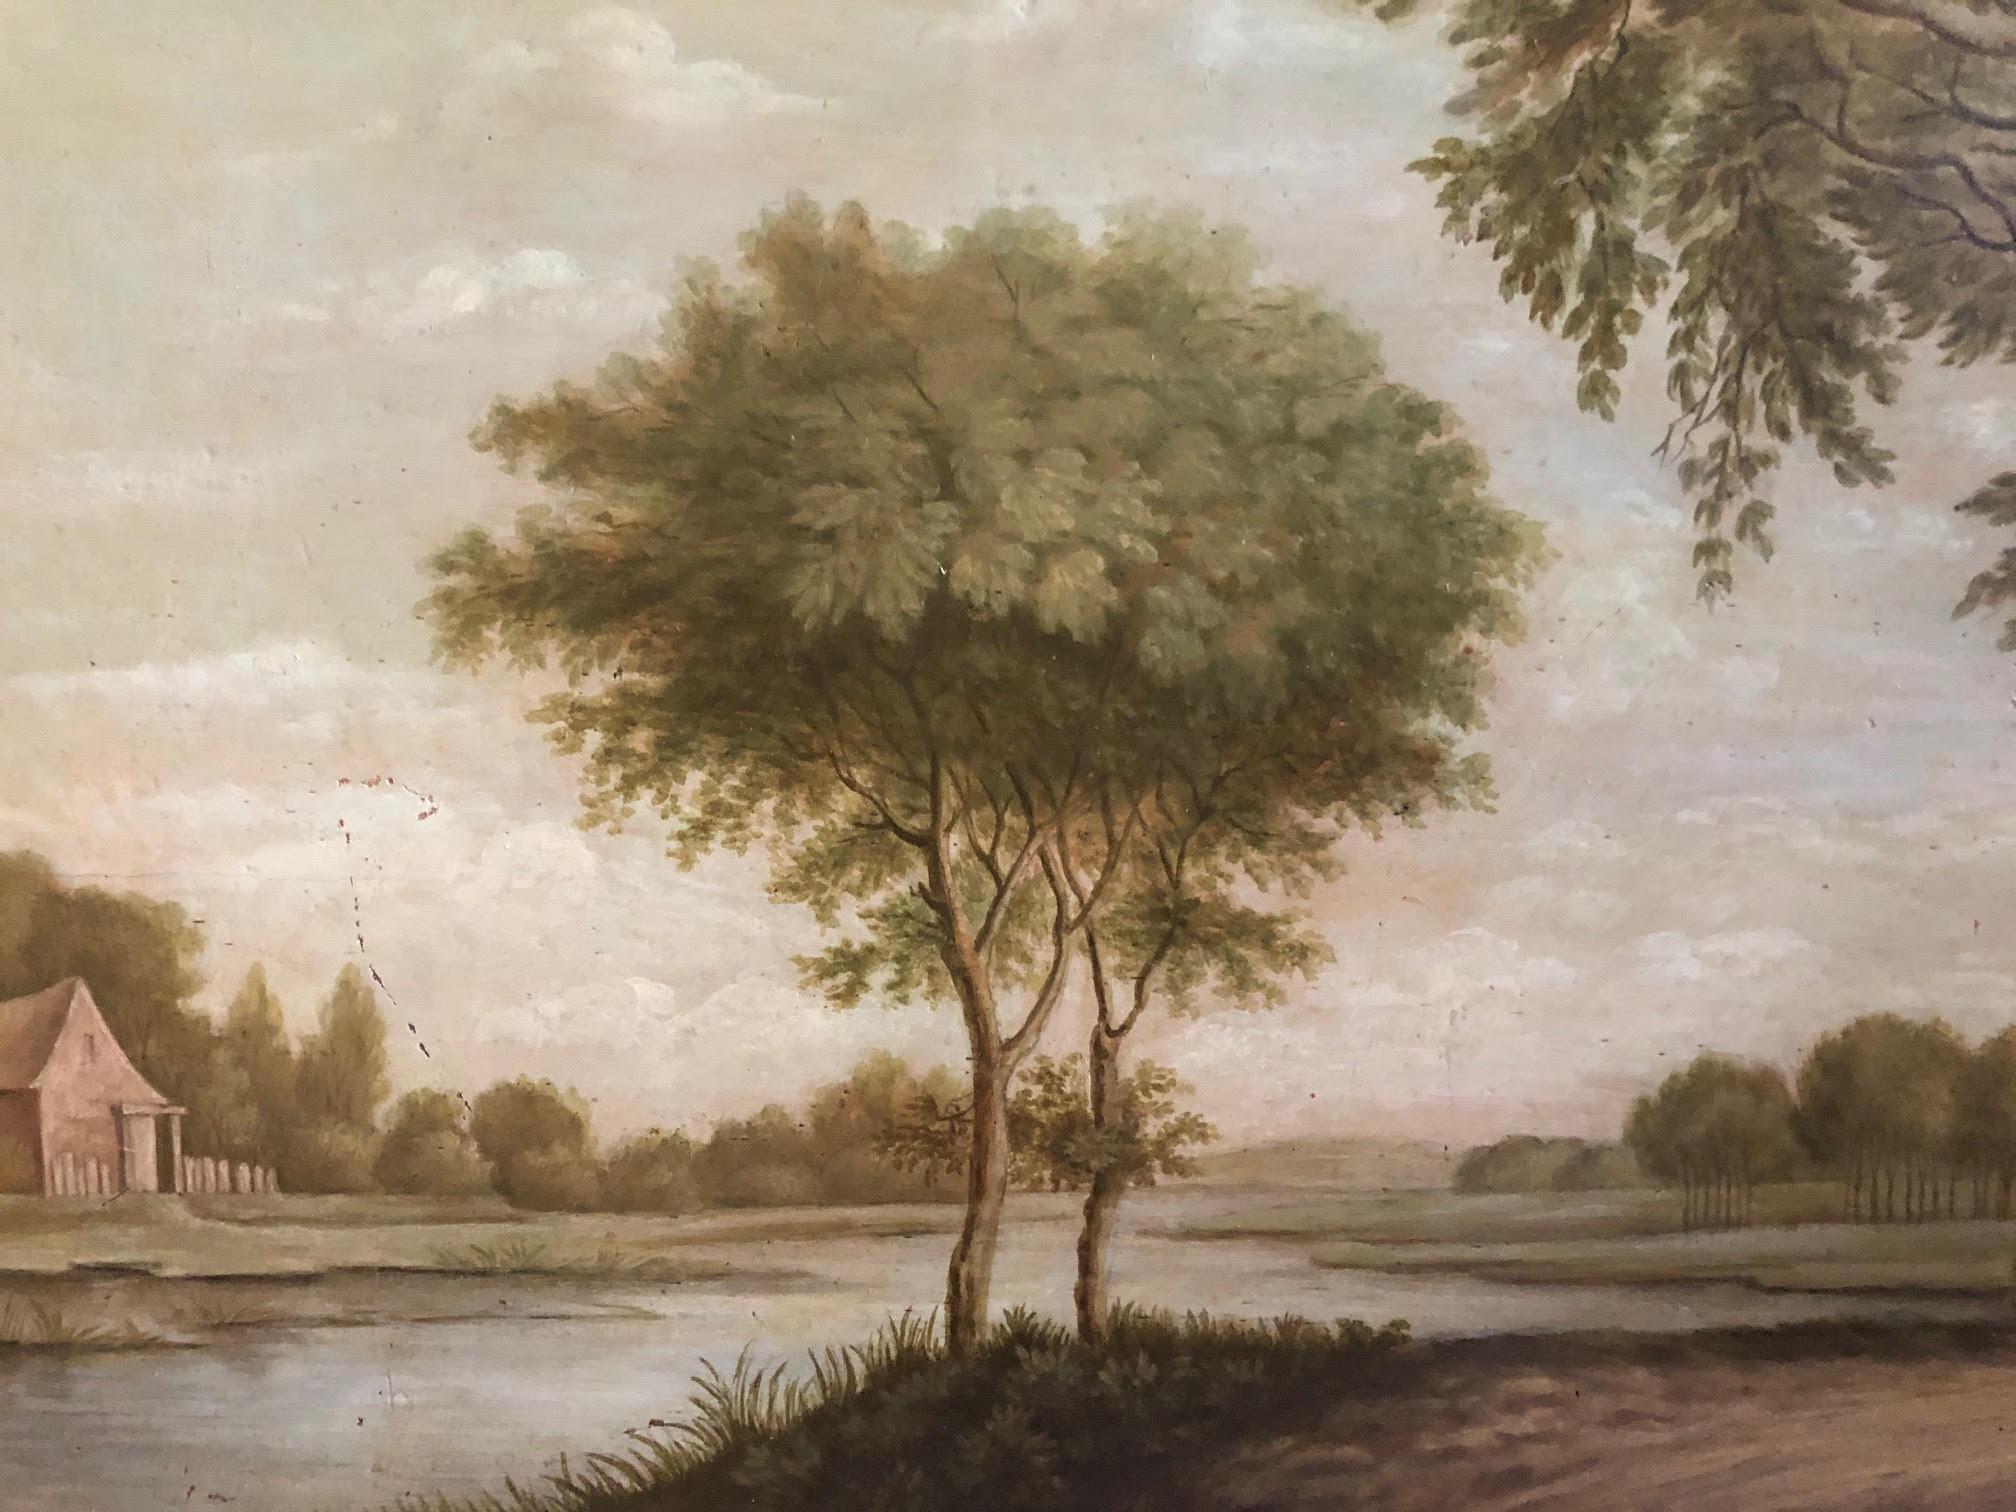 Giltwood Late 18th-Early 19th Century Danish Oil on Board Landscape Painting For Sale